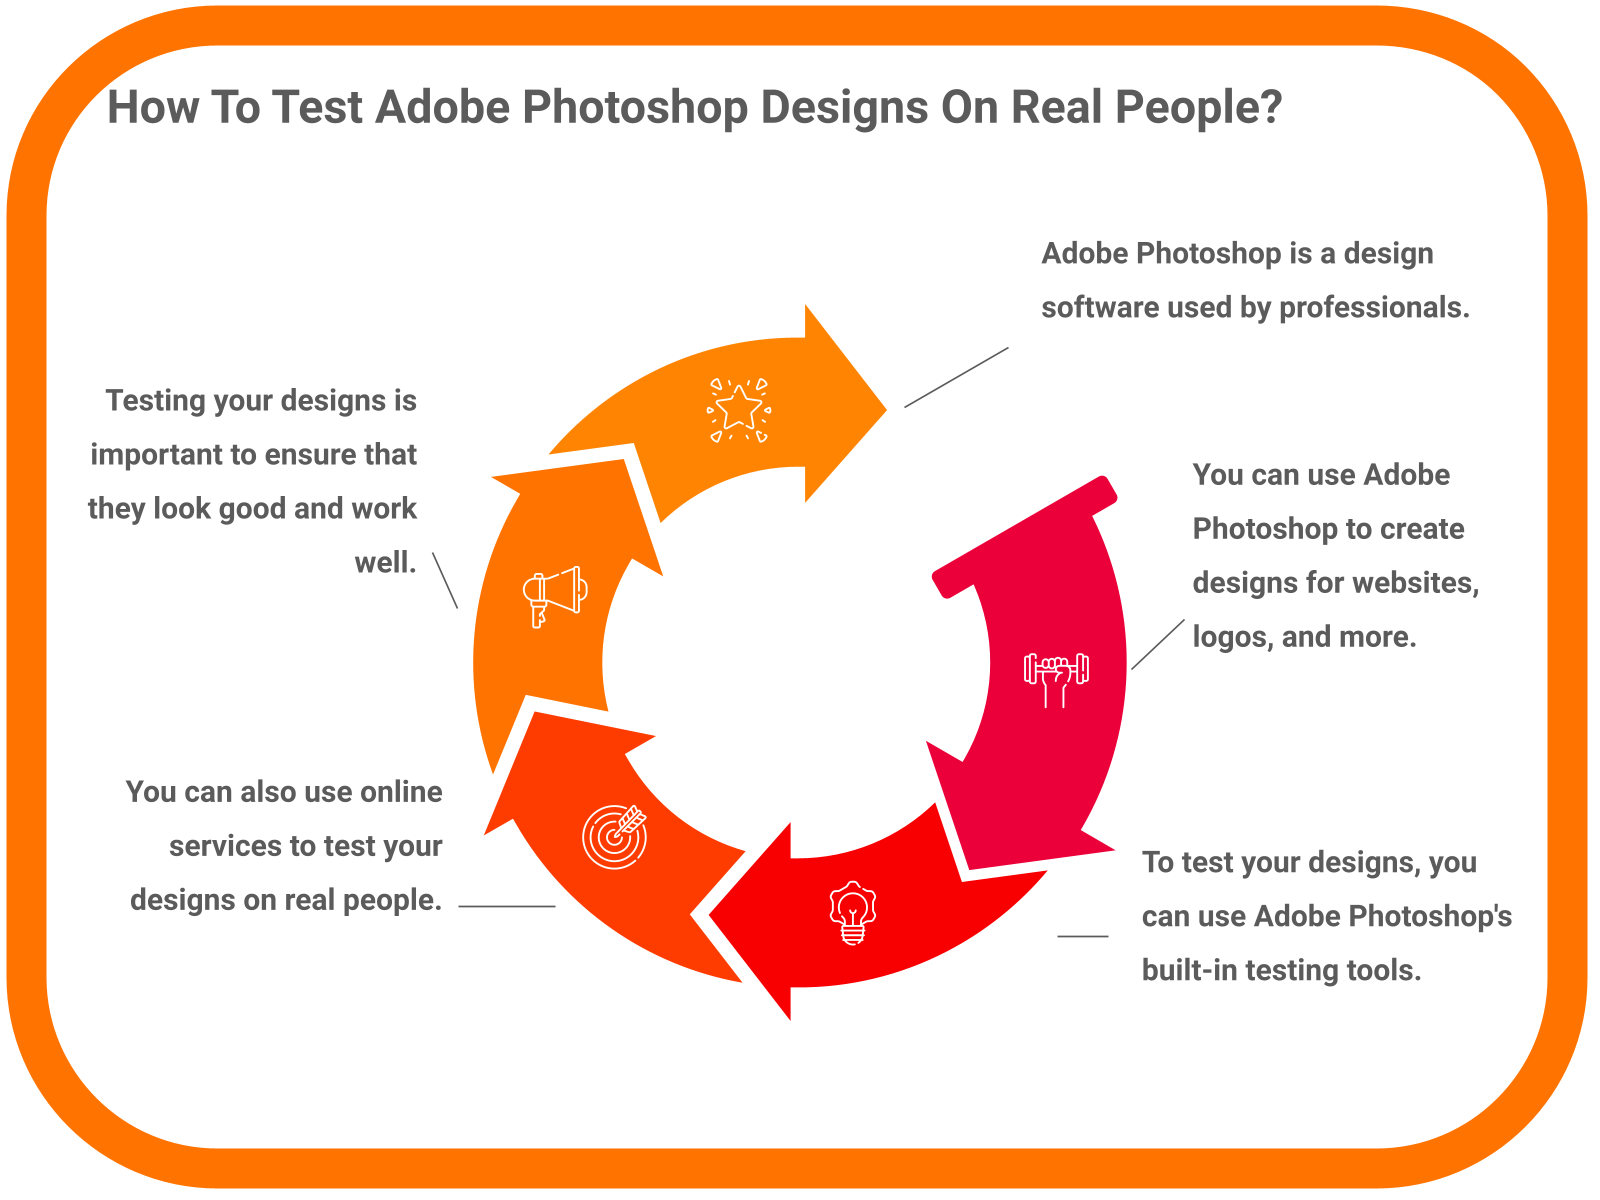 How To Test Adobe Photoshop Designs On Real People?